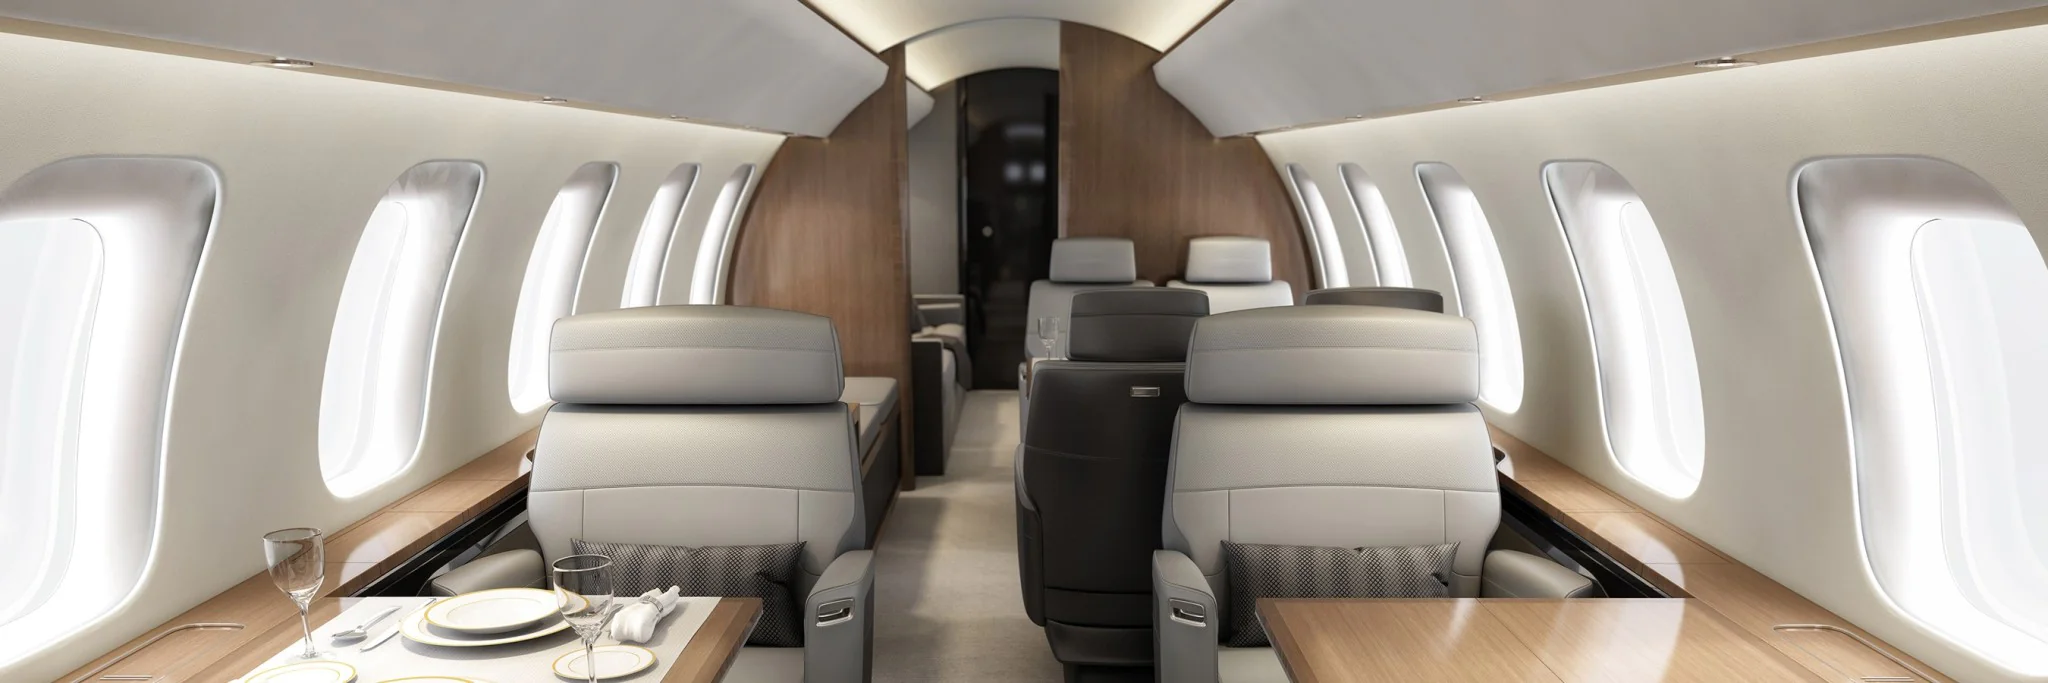 Private Jet Charter Global 8000 interior